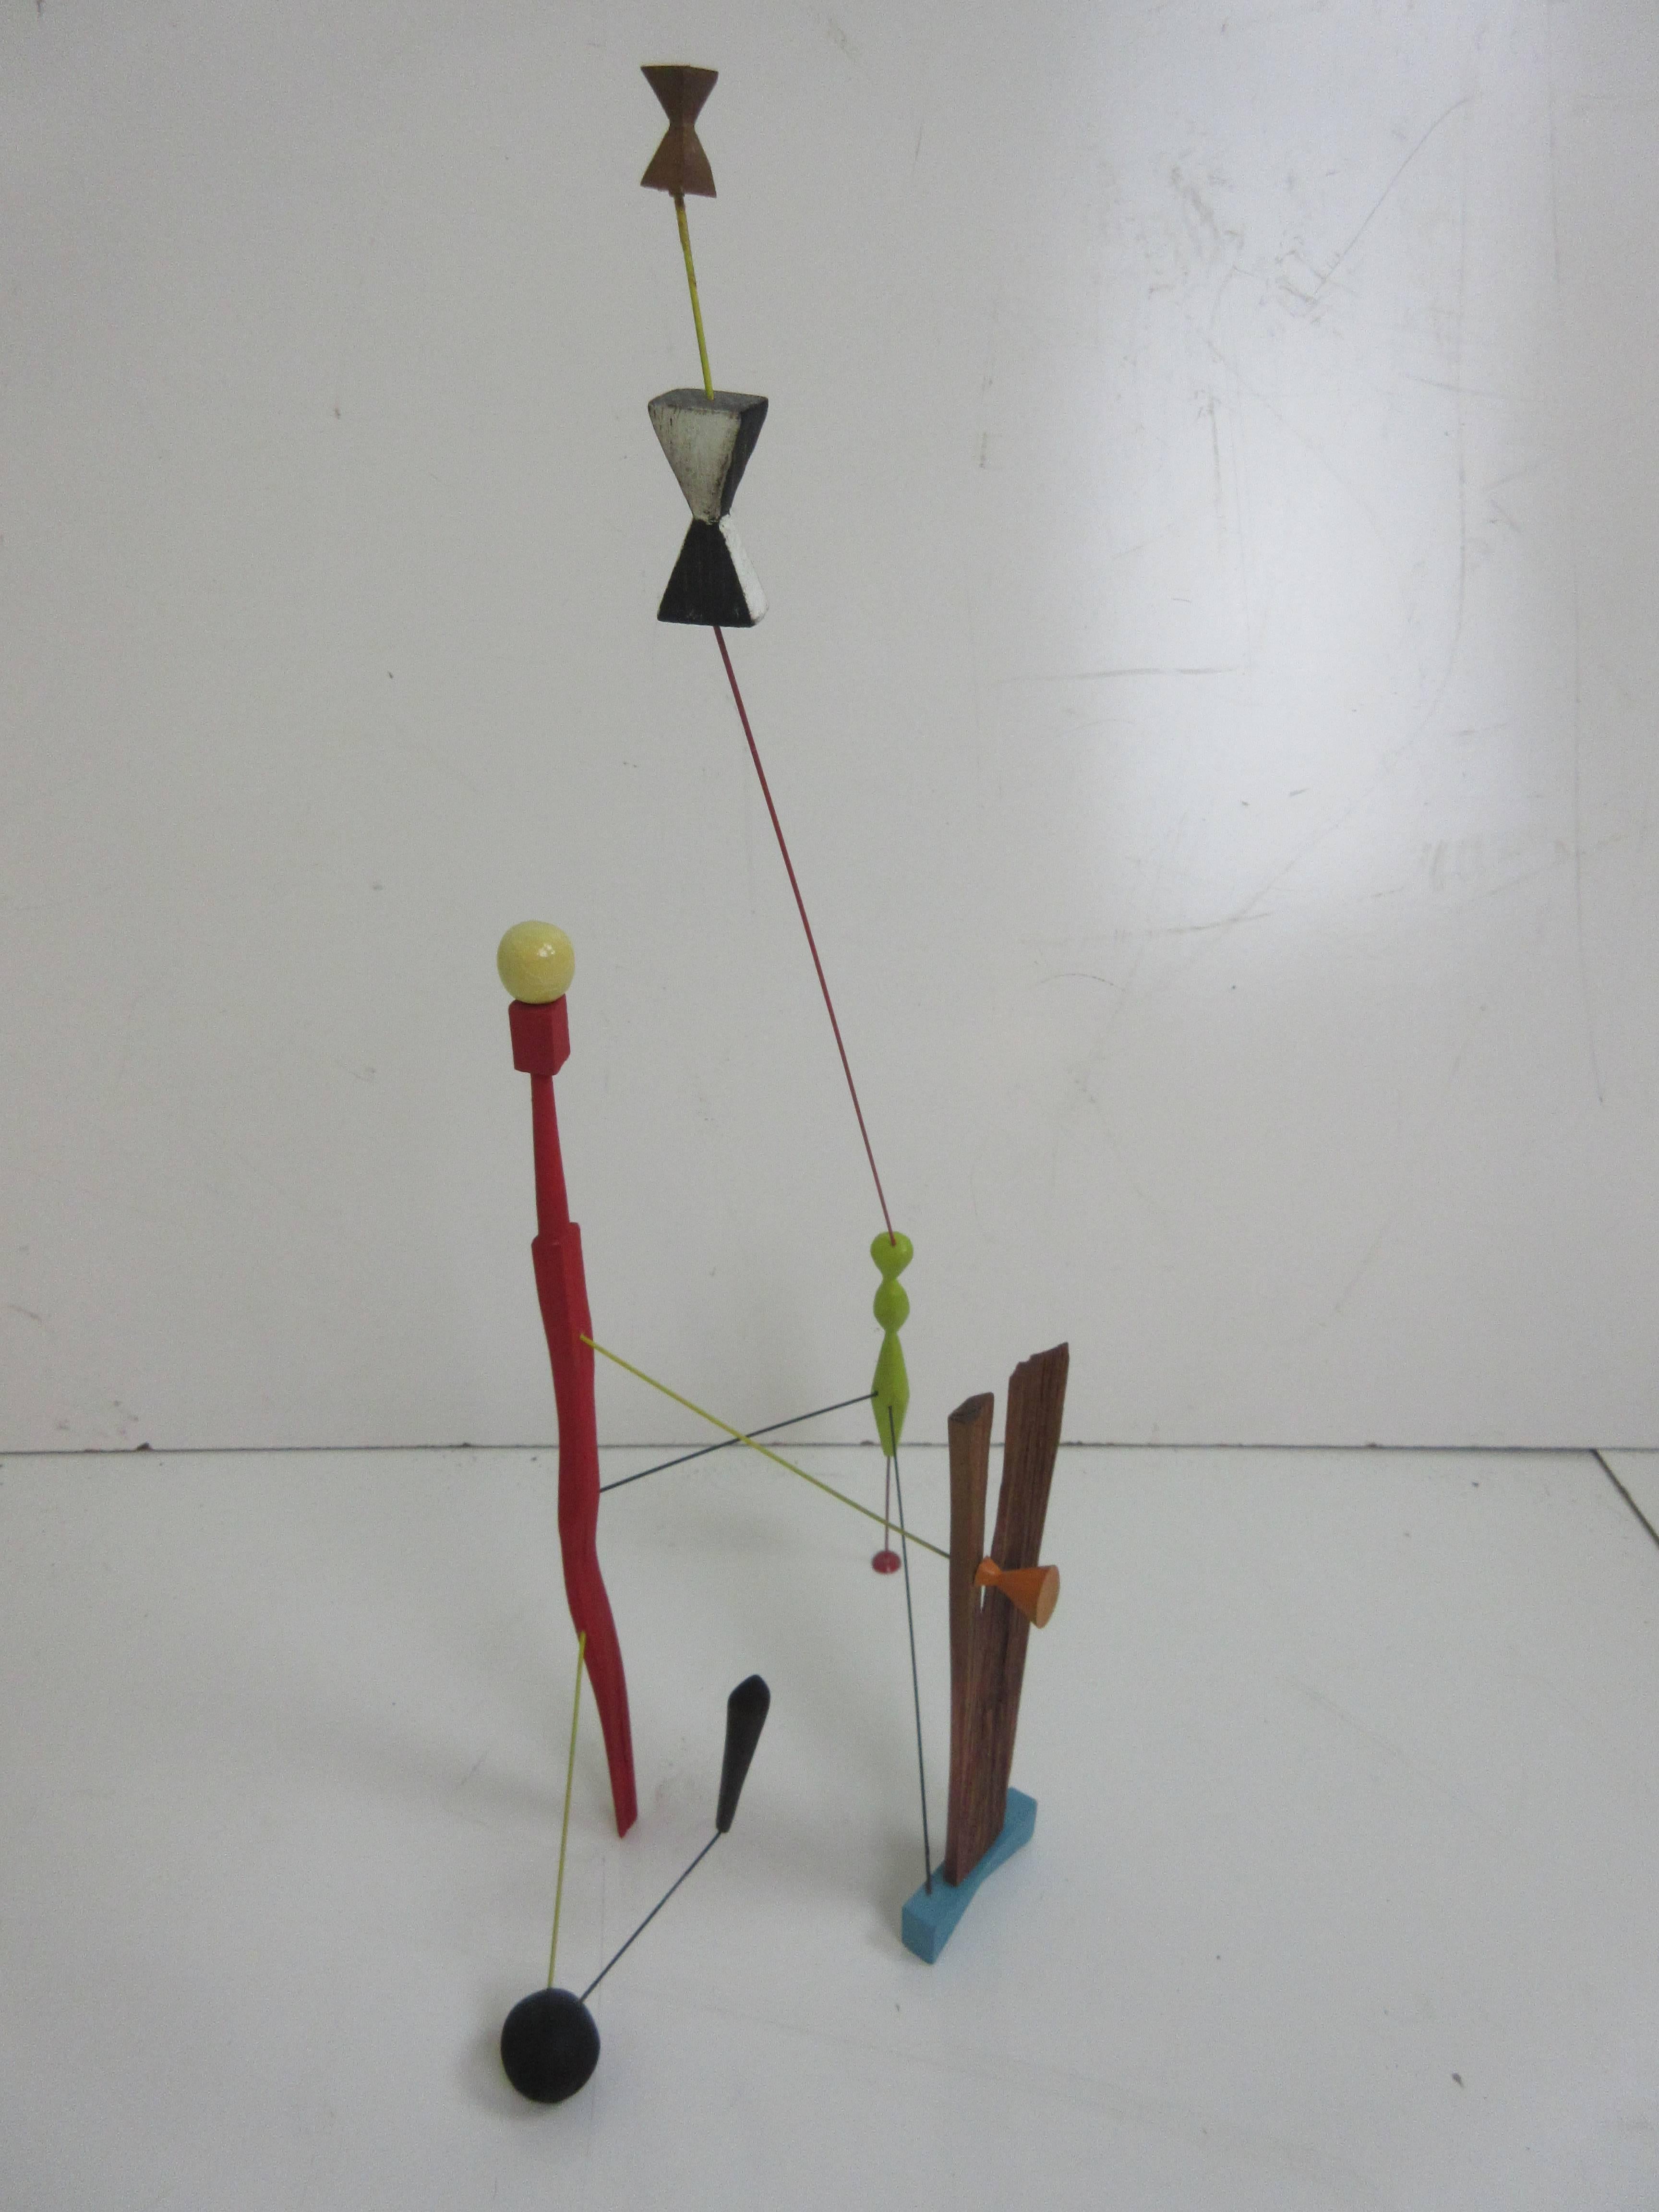 Adam Henderson sculpture tree house #2 of painted wood and ridged wire with one pod foot. Wood pieces not touching the ground seem to soar like box kites. This is a particularly colorful piece with chartreuse, red, turquoise and one piece of raw